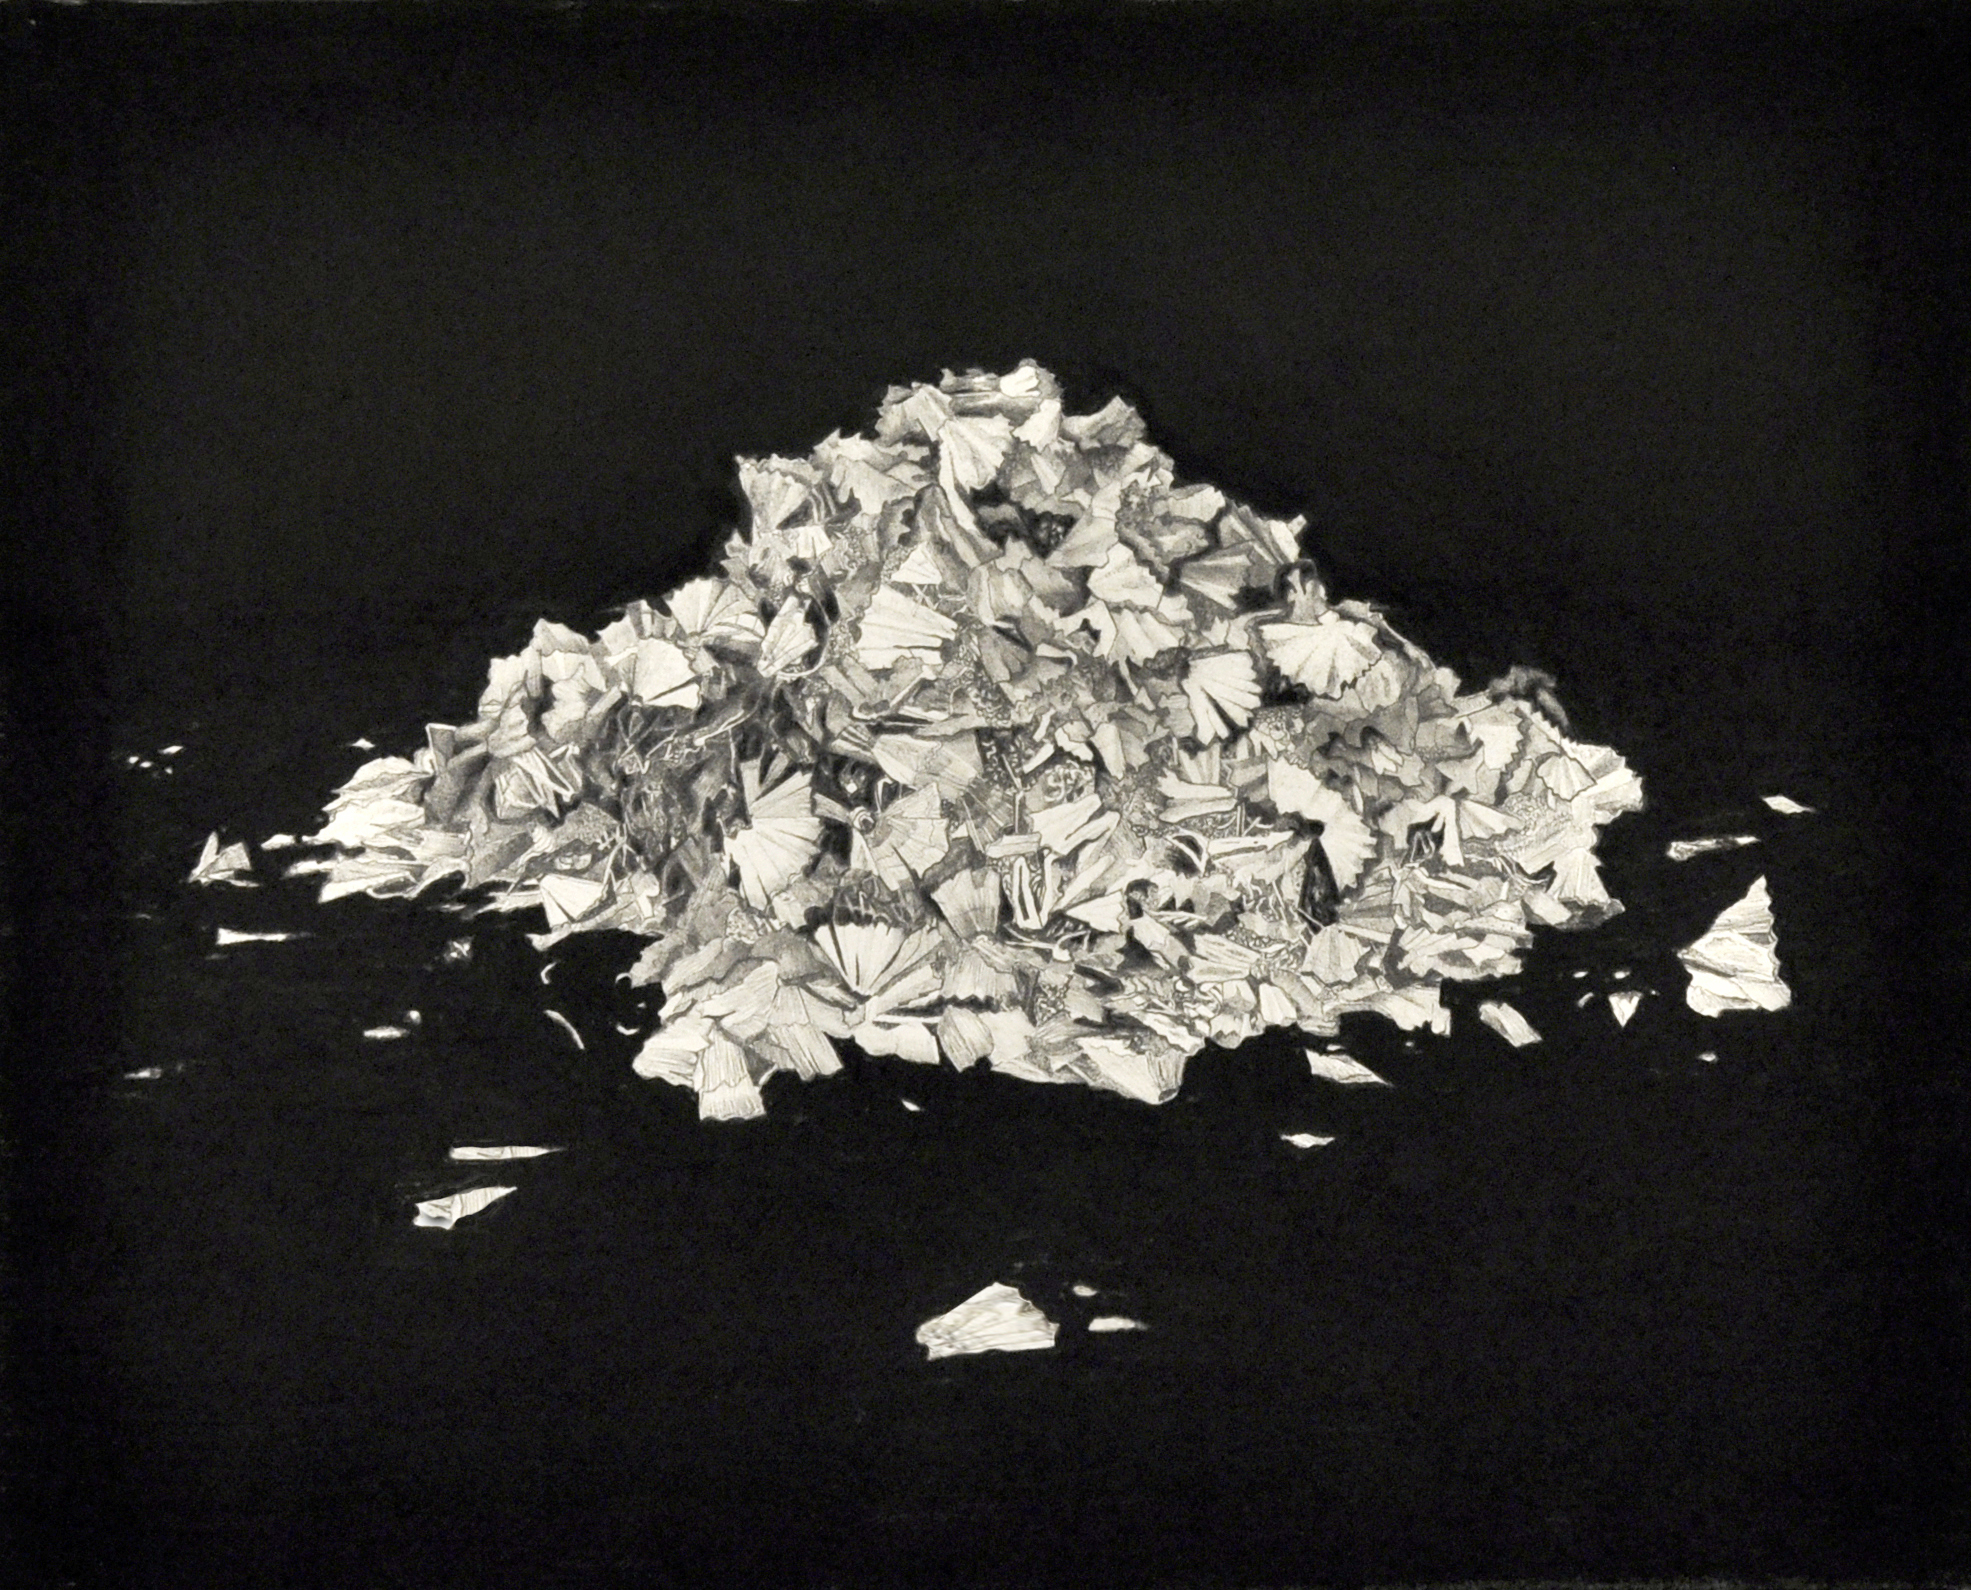   Experiments in flight, debris &nbsp;2014 graphite and charcoal on paper 21.0 x 30.0 cm 